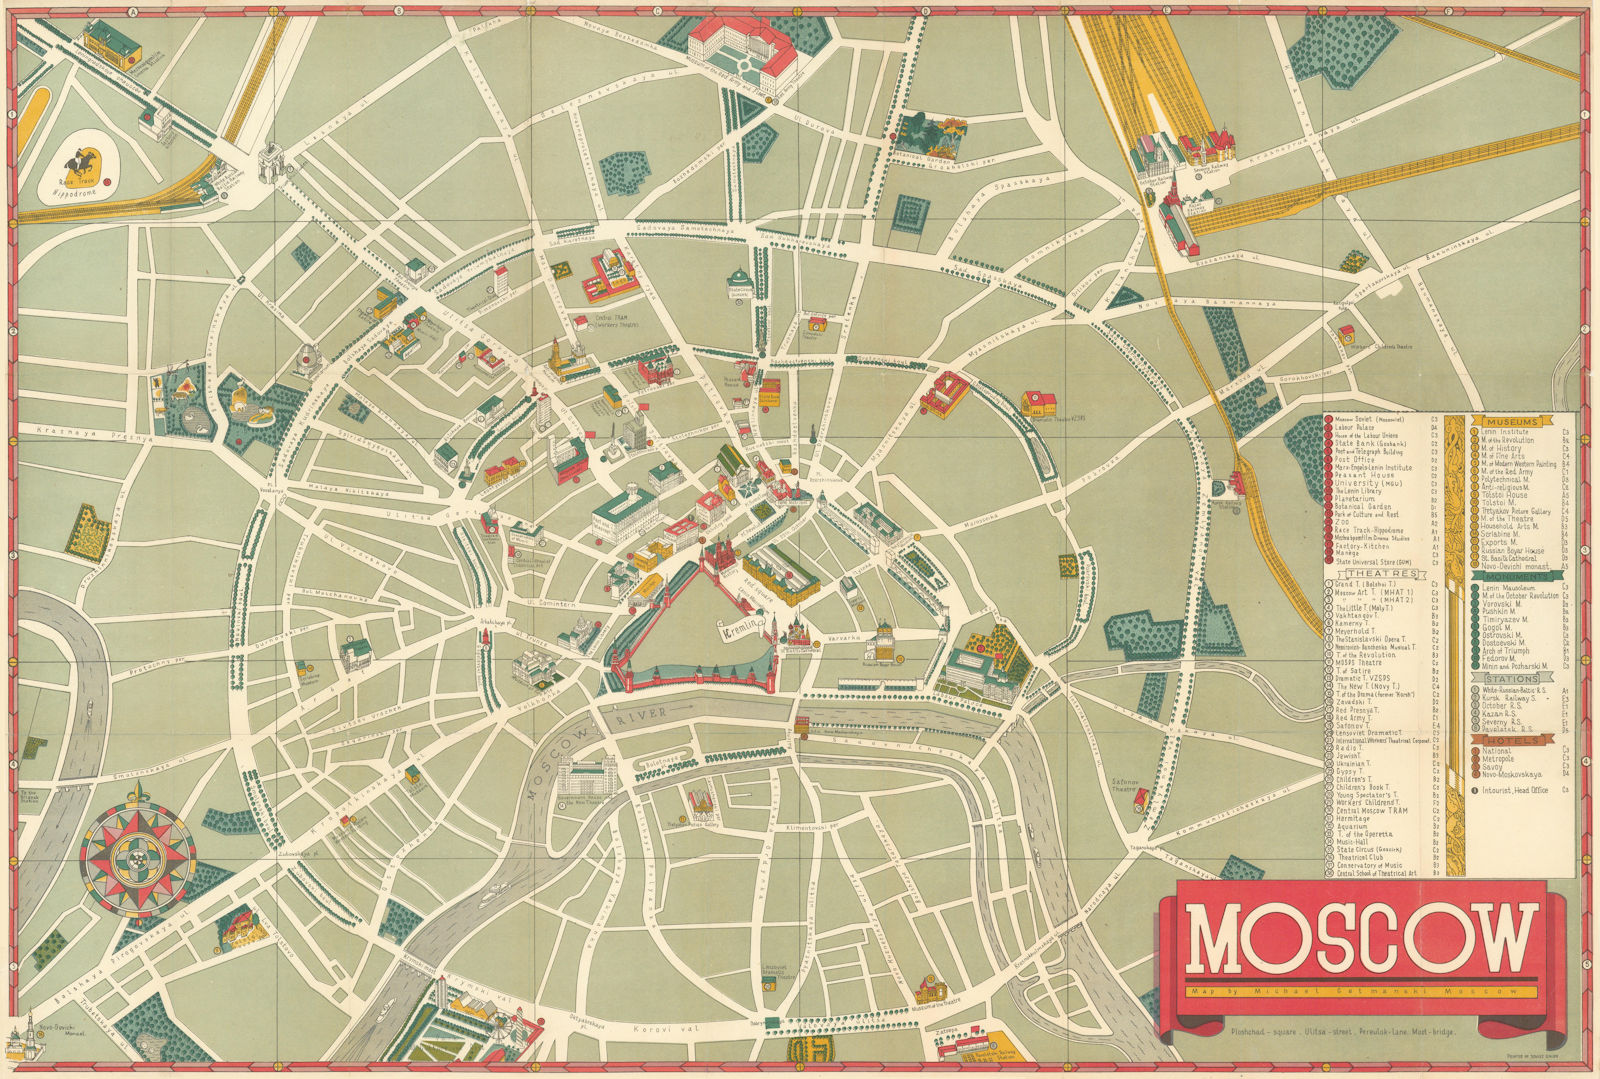 Pictorial tourist map of Moscow by Michael Getmanski / Intourist c1930 old